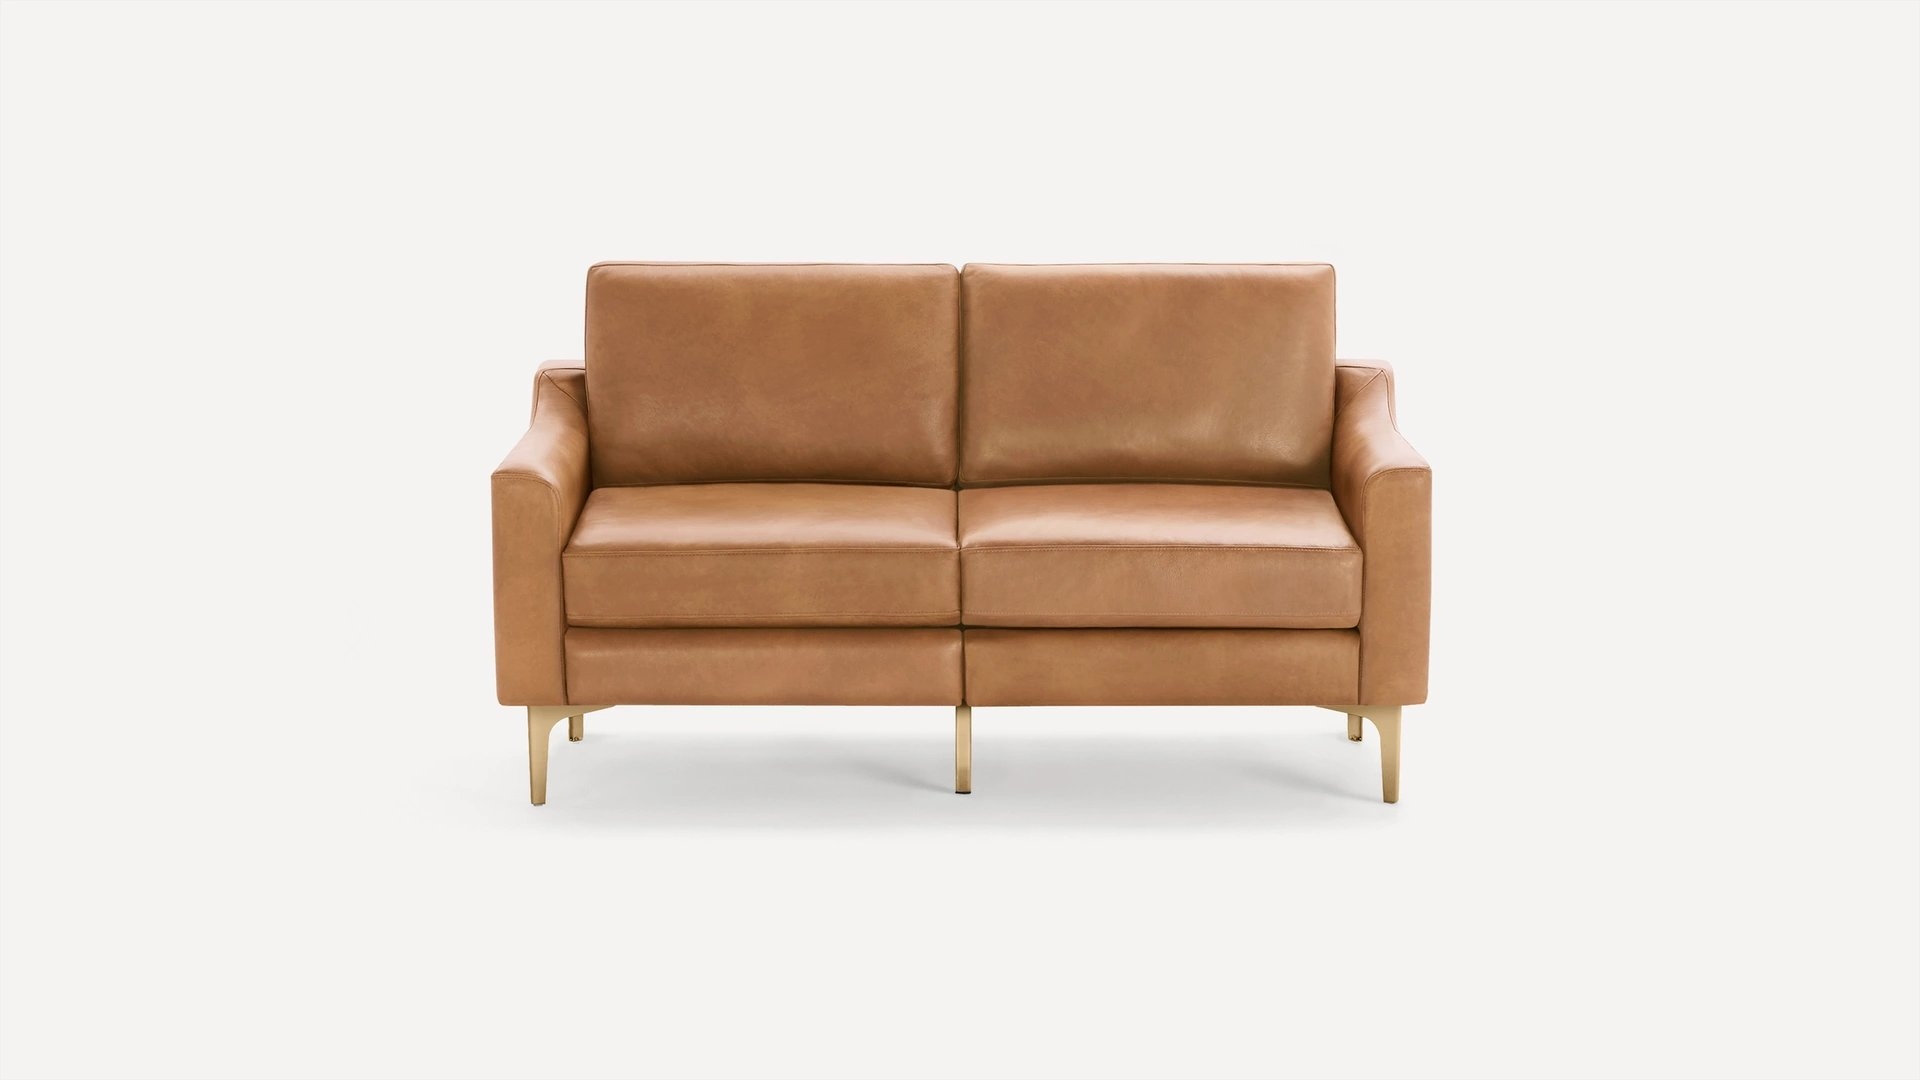 Slope Nomad Leather Loveseat in Camel with Brass Metal Legs - Image 0